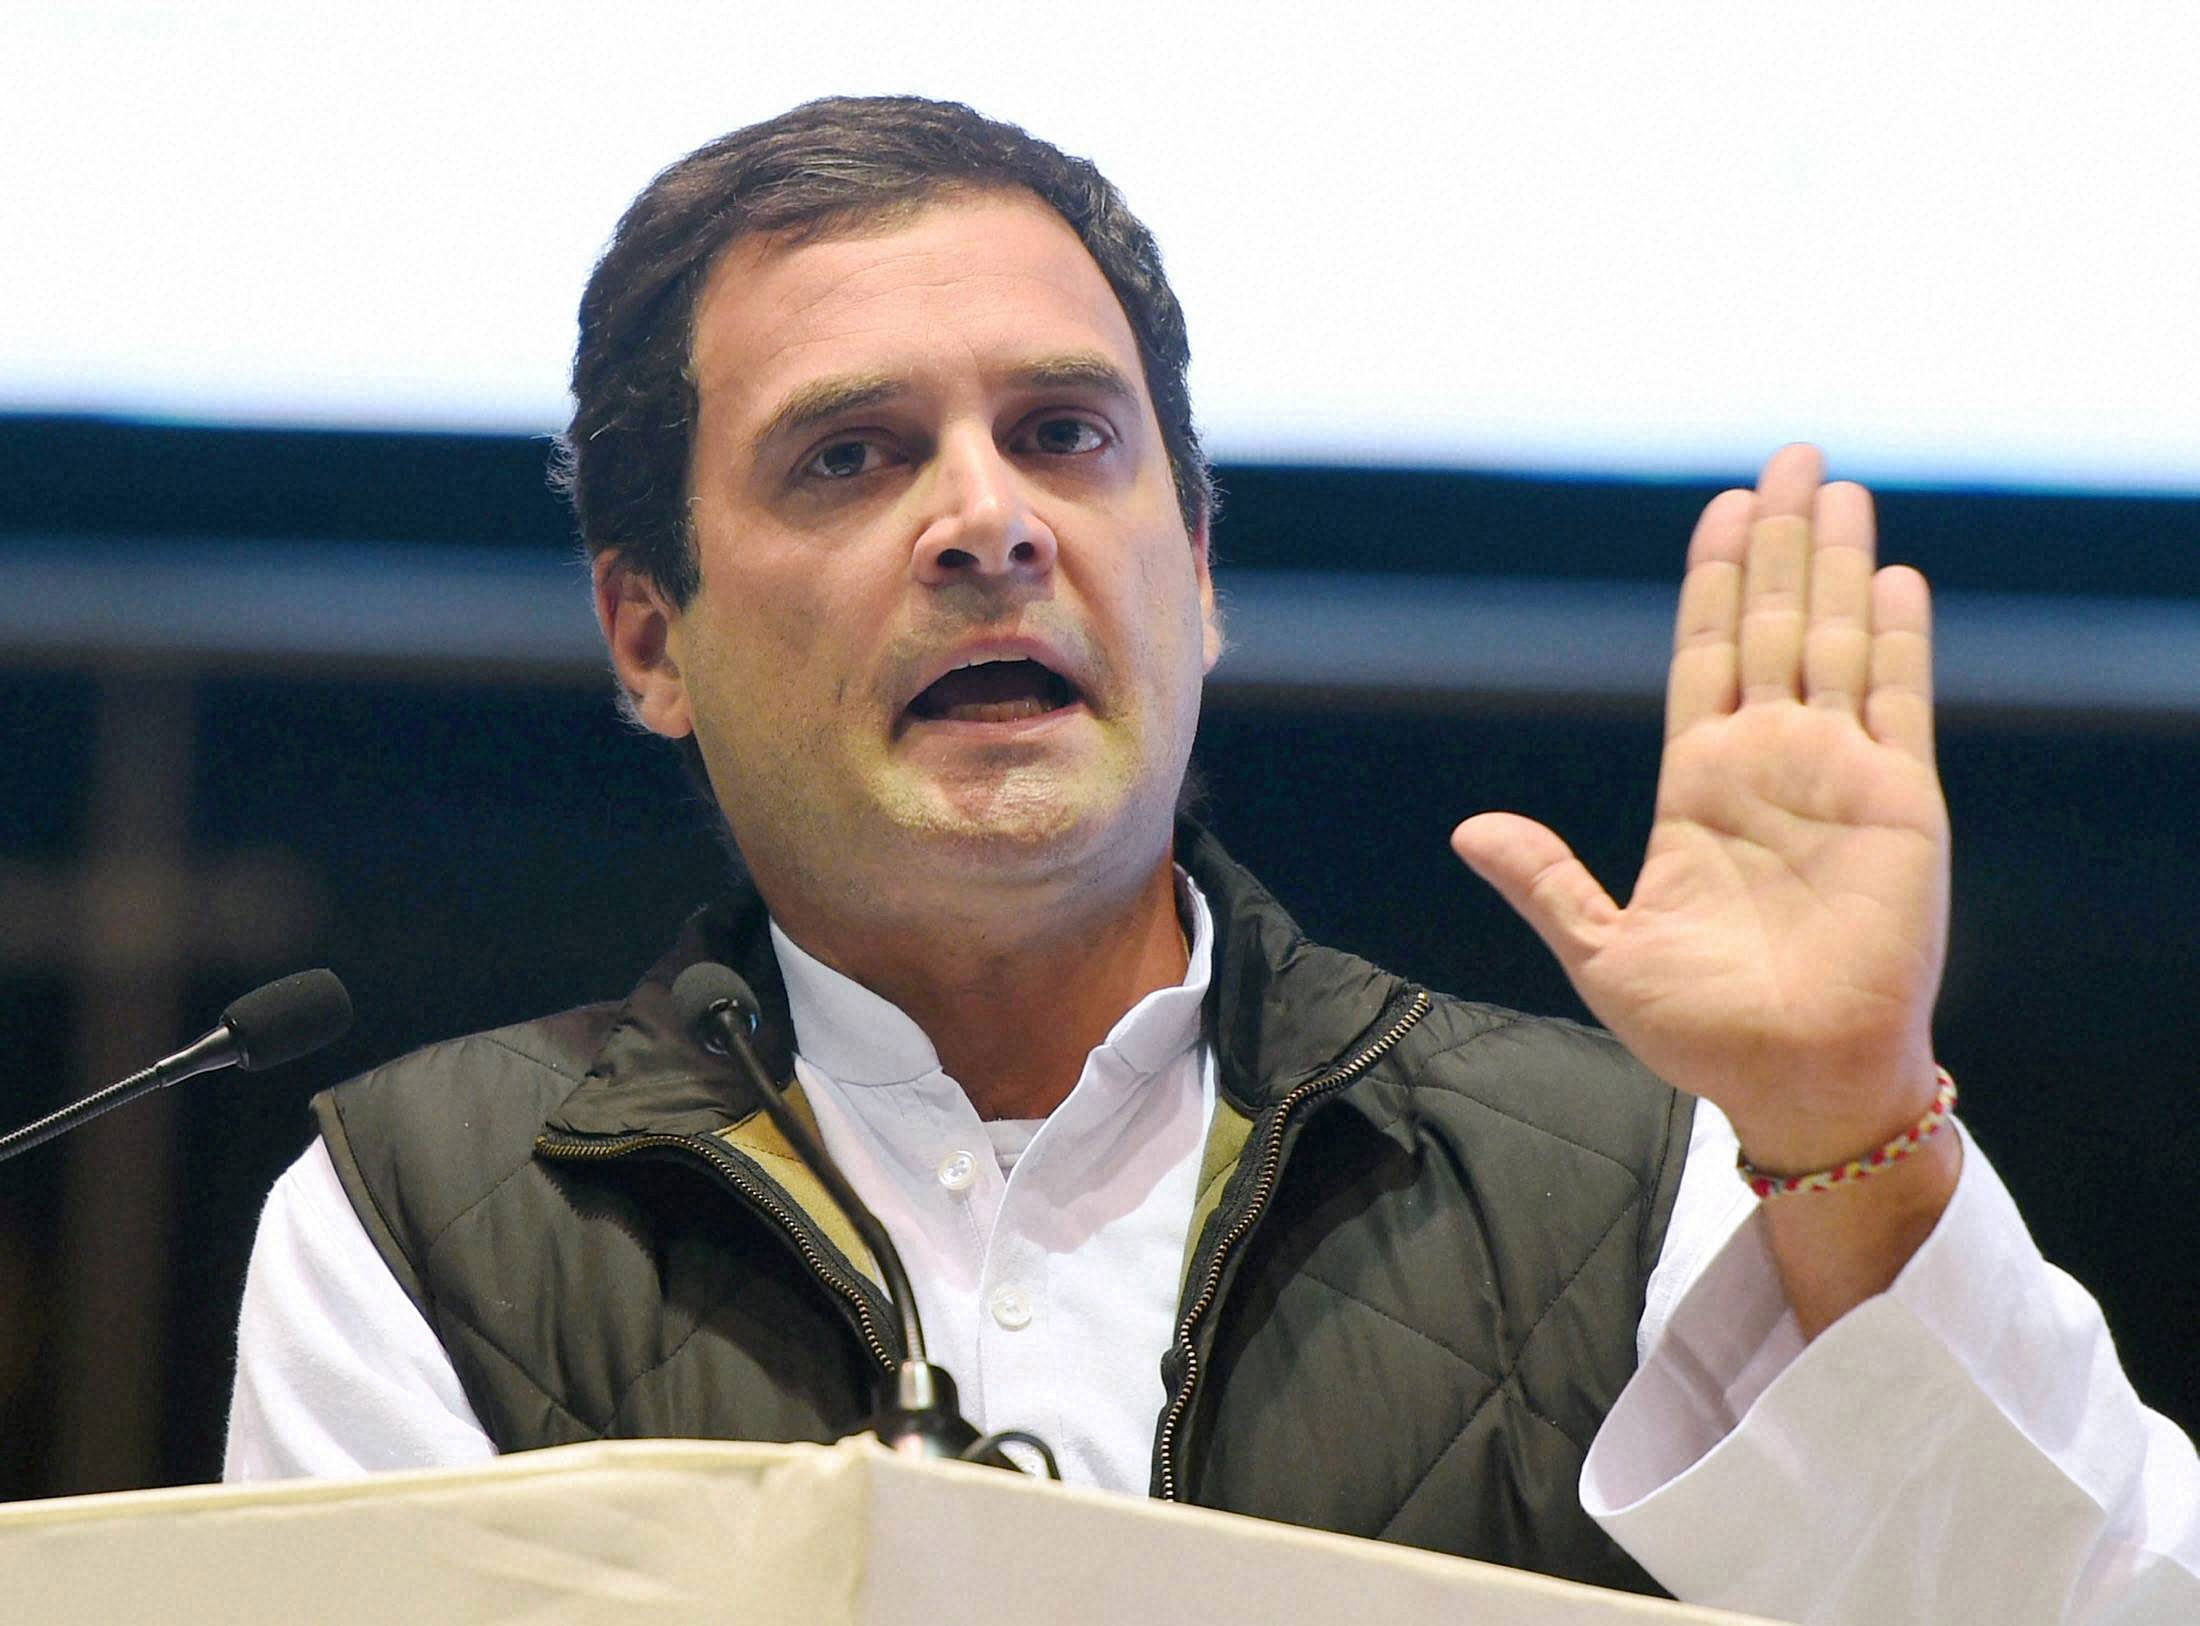 Slamming the Budget, Rahul Gandhi today said it lacked a clear vision and had nothing for farmers, youths and job creation. PTI FIle photo